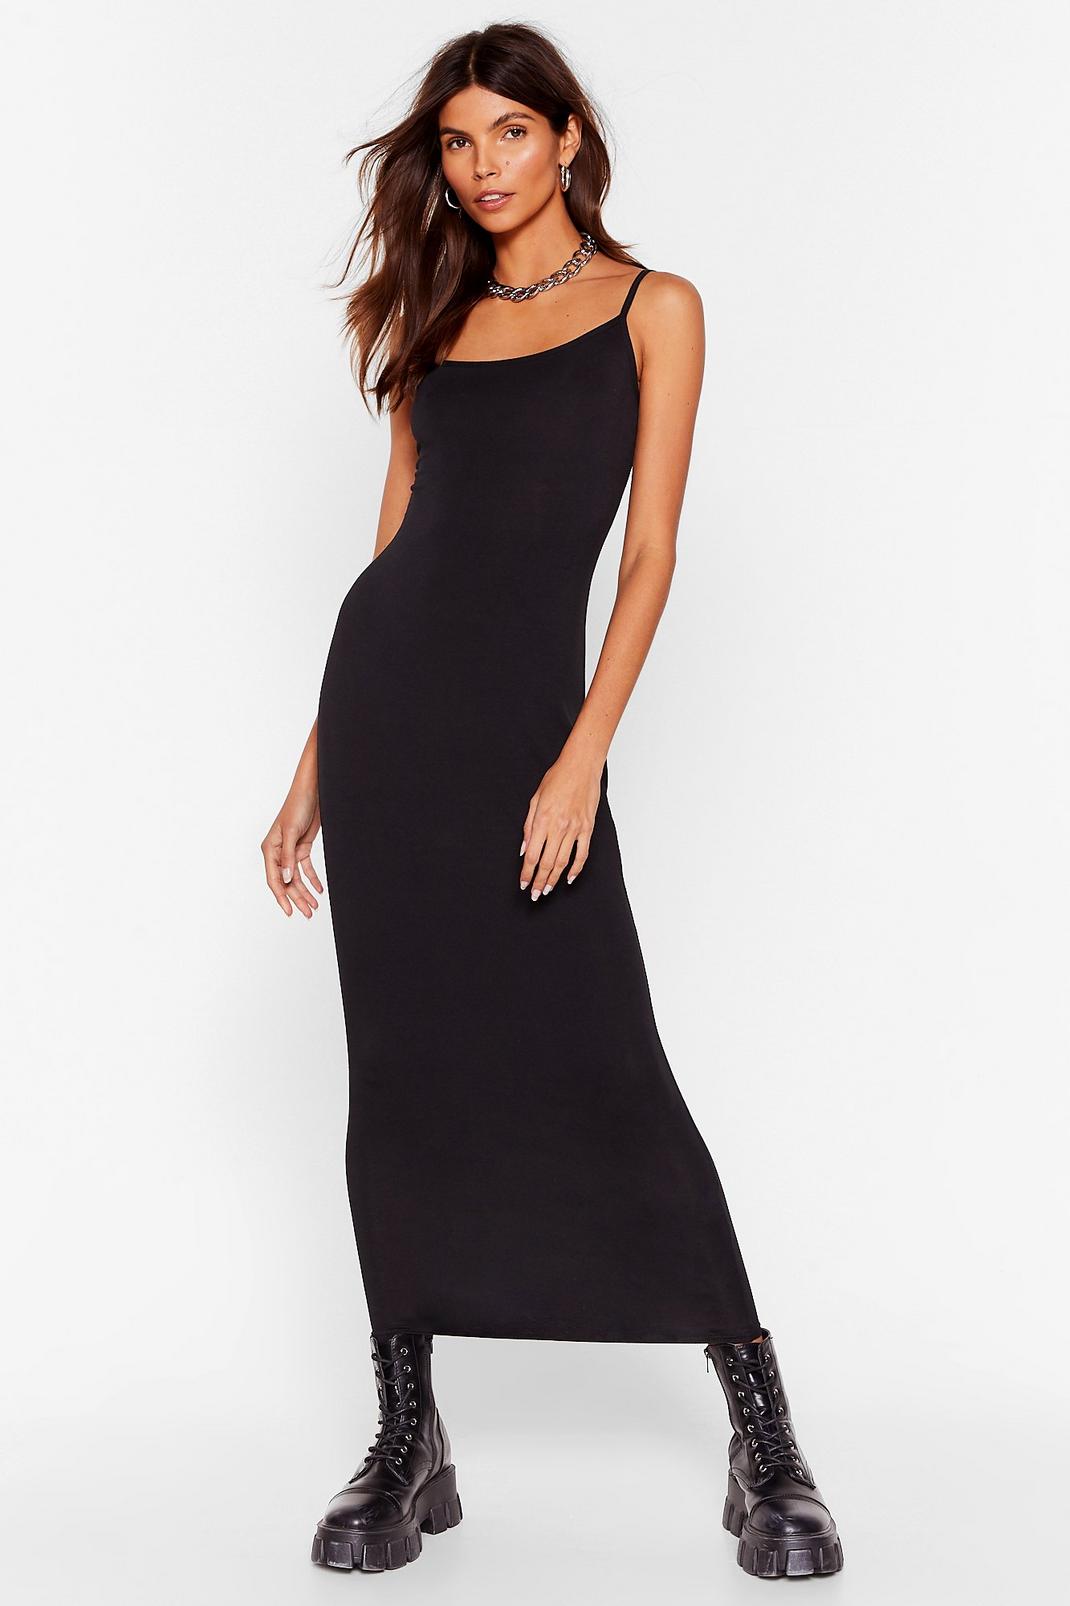 Black Fit's Time for a Change Midi Dress image number 1